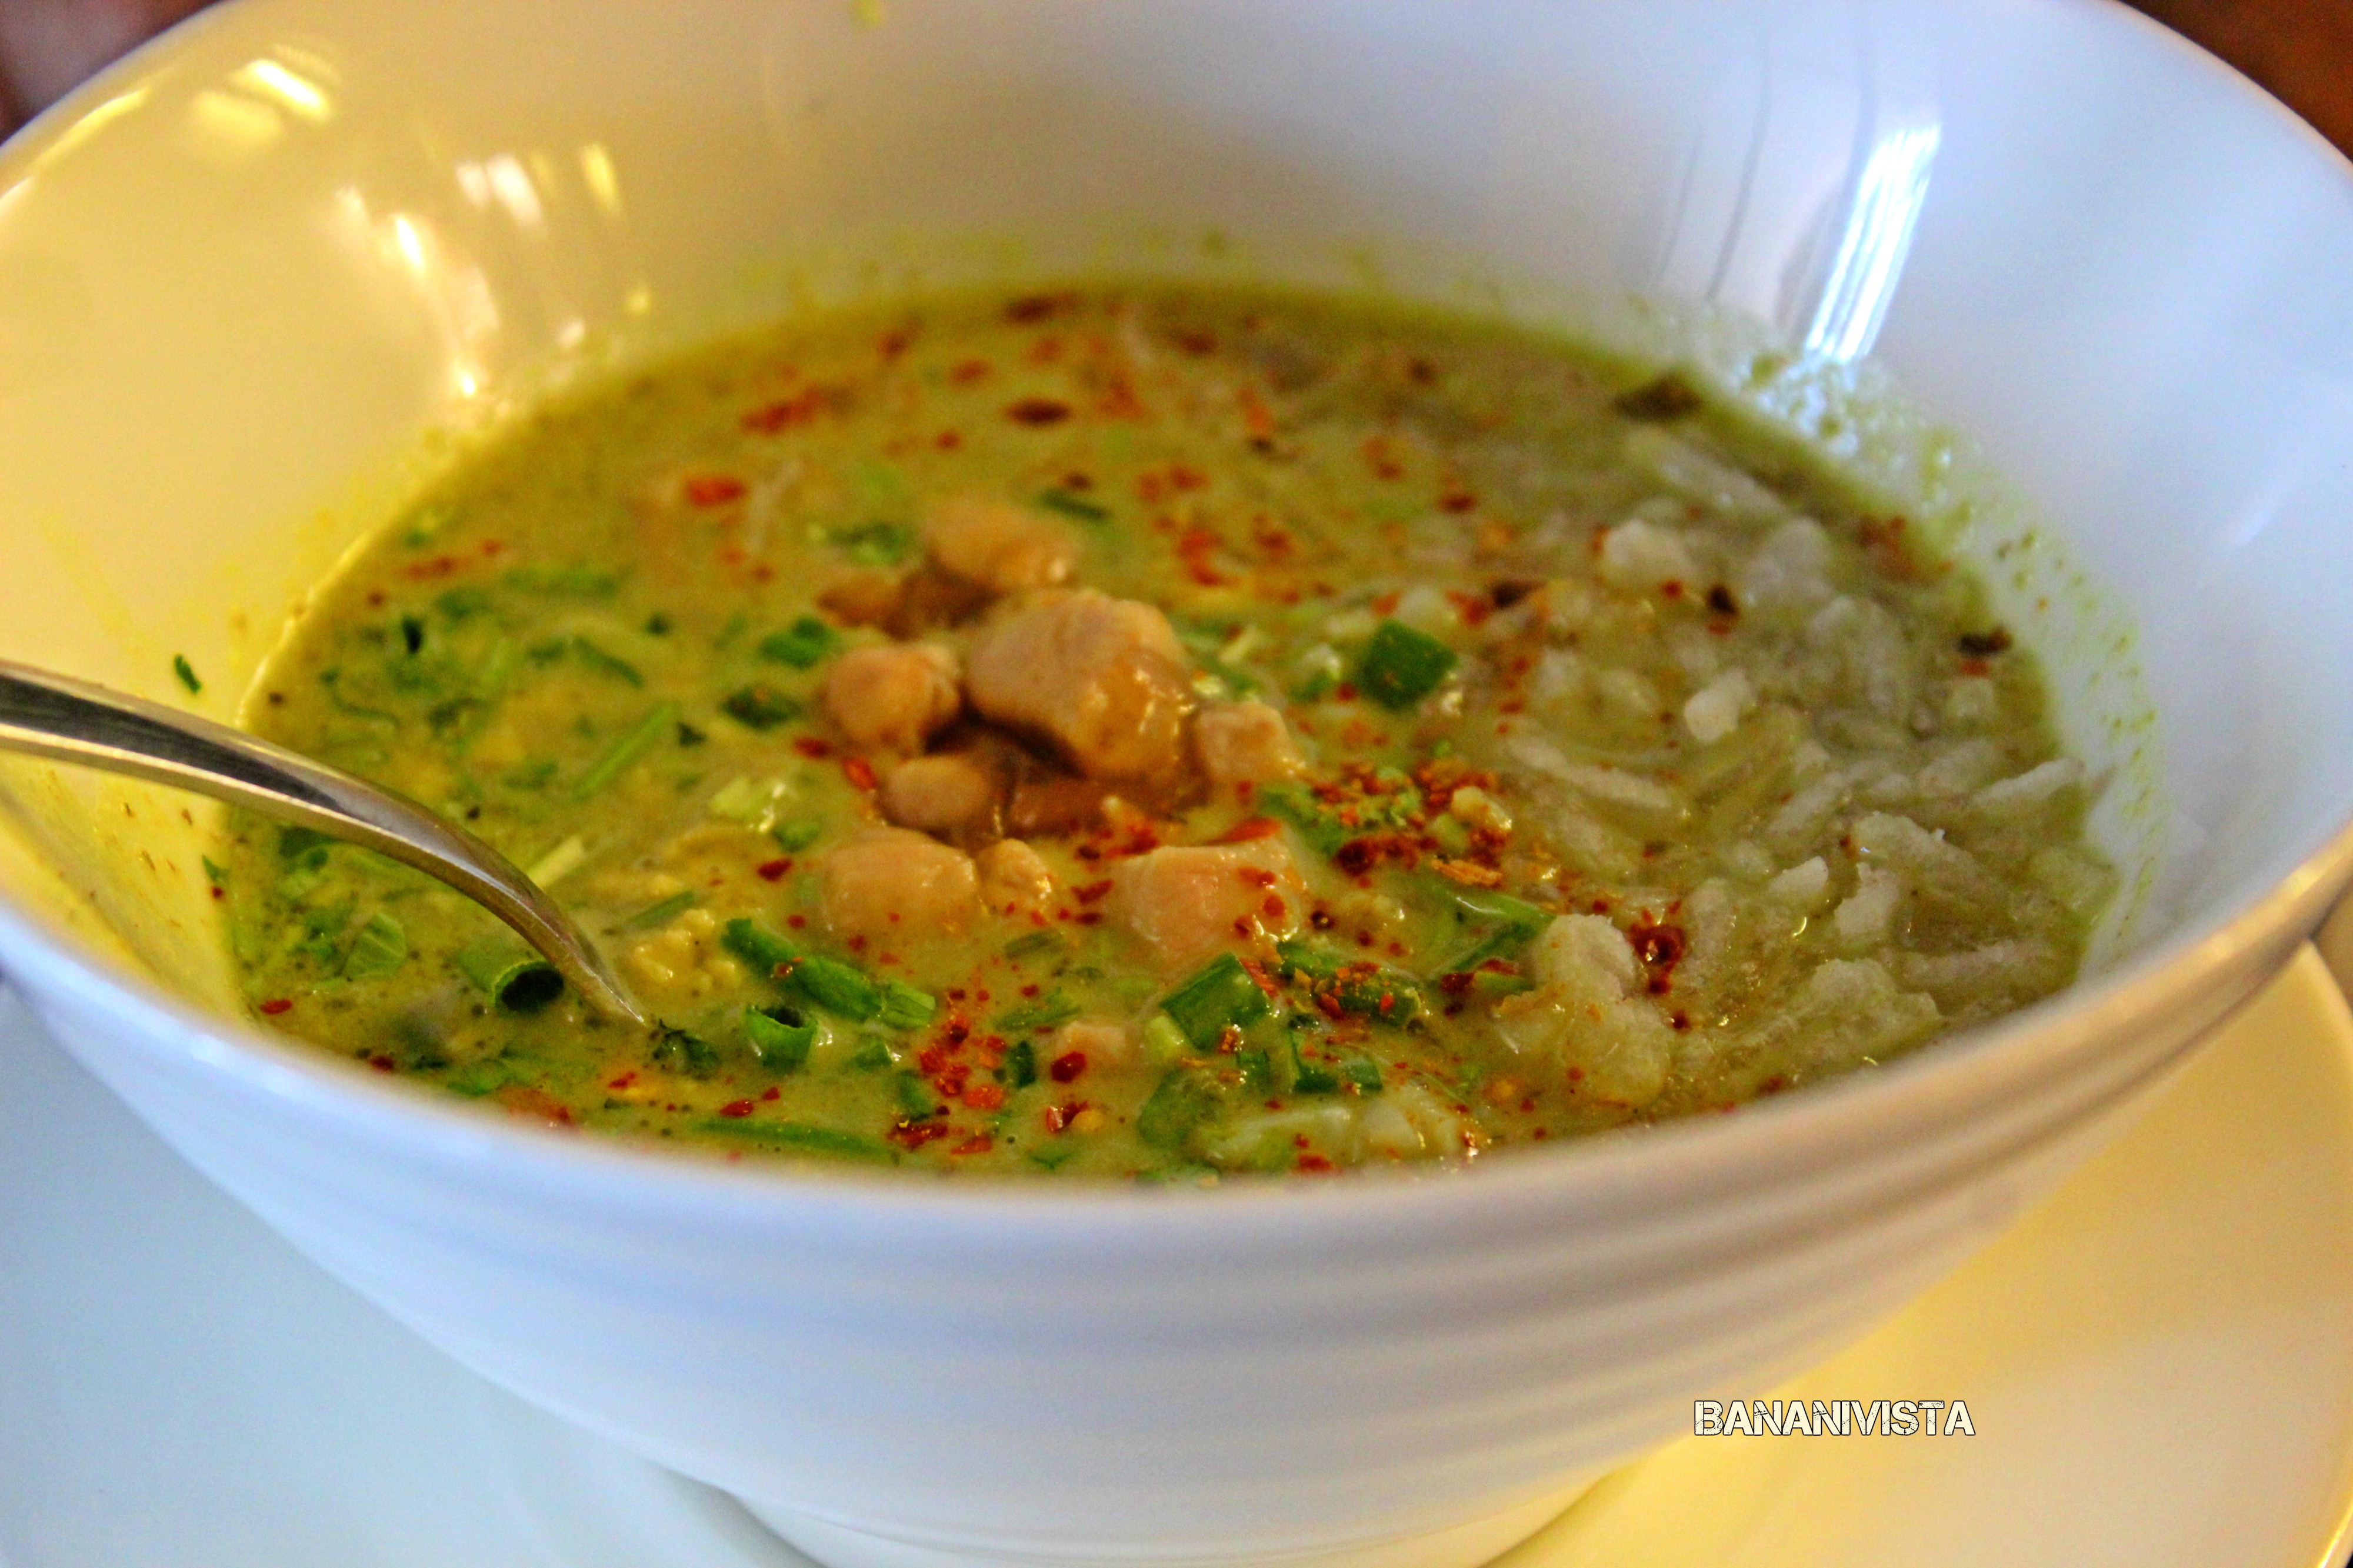 The Khow Suey Soup: a mix of rice, egg yolk and egg white, chicken chunks, coriander, decorated with coriander.